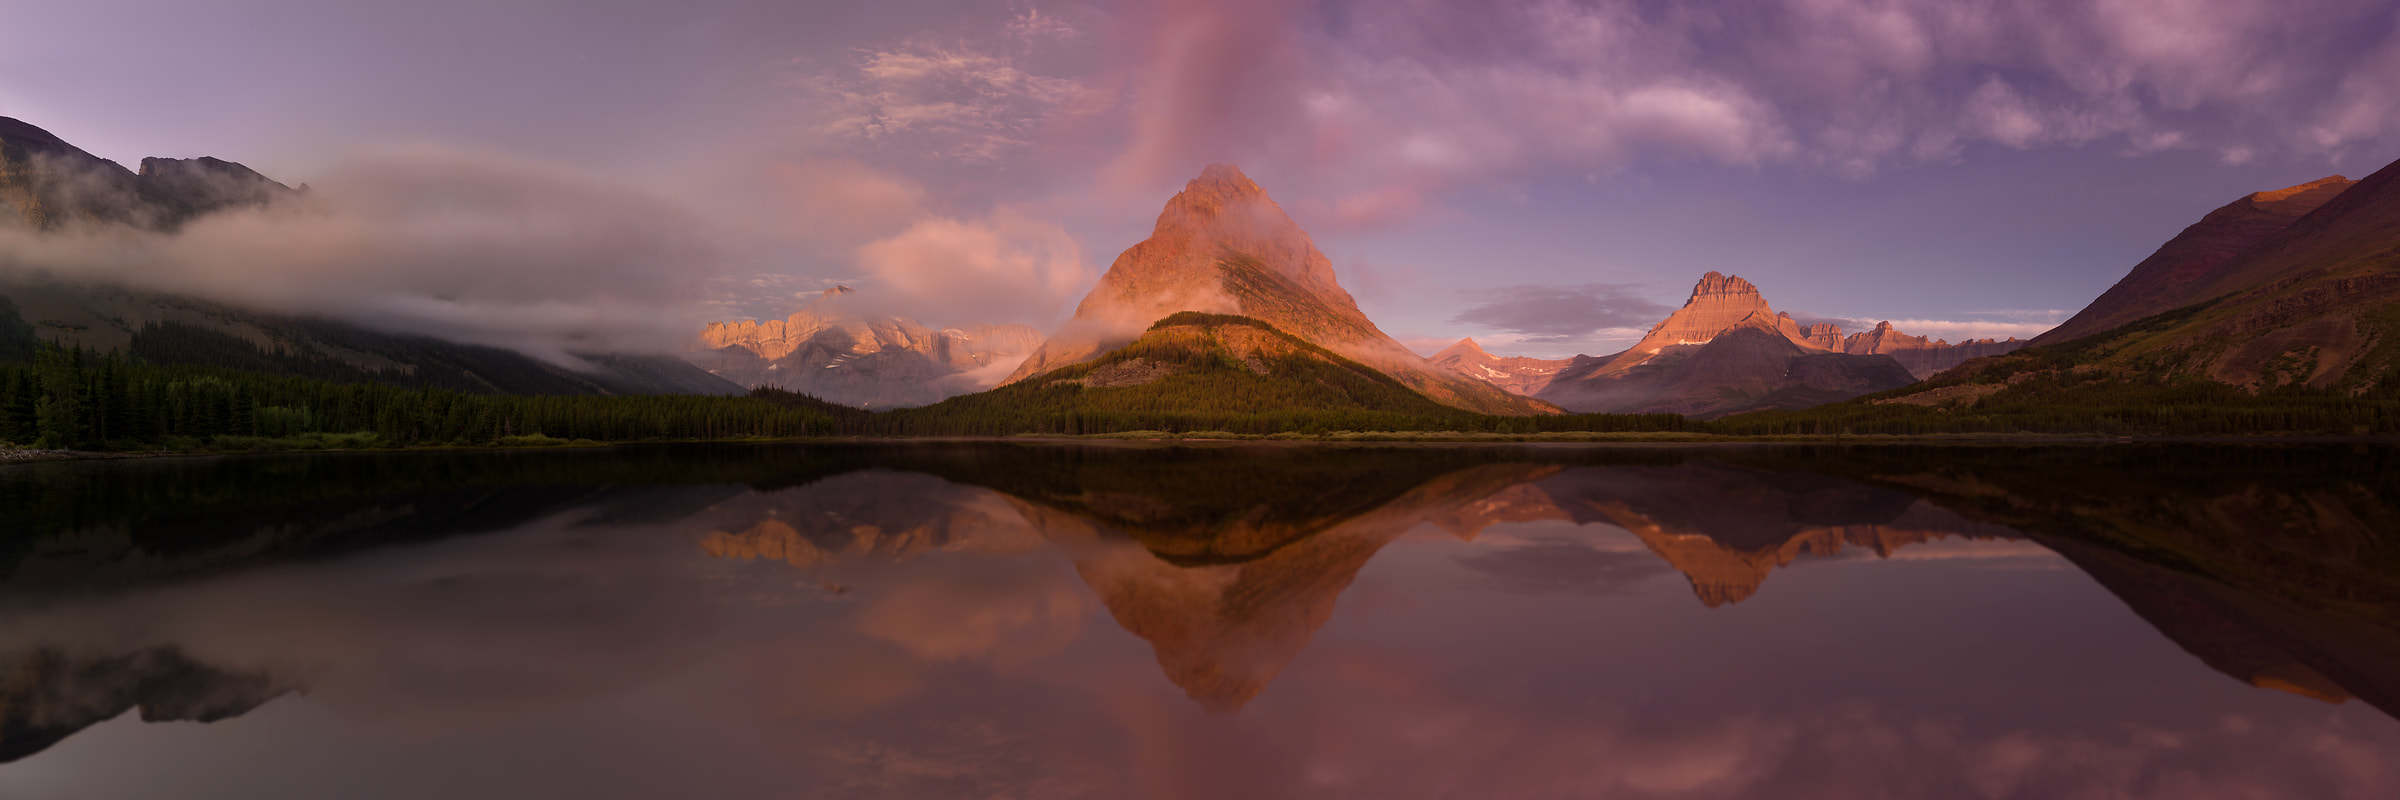 109 megapixels! A very high resolution, large-format VAST photo print of Swiftcurrent Lake in Glacier National Park, Montana; nature landscape photo created by Guido Brandt